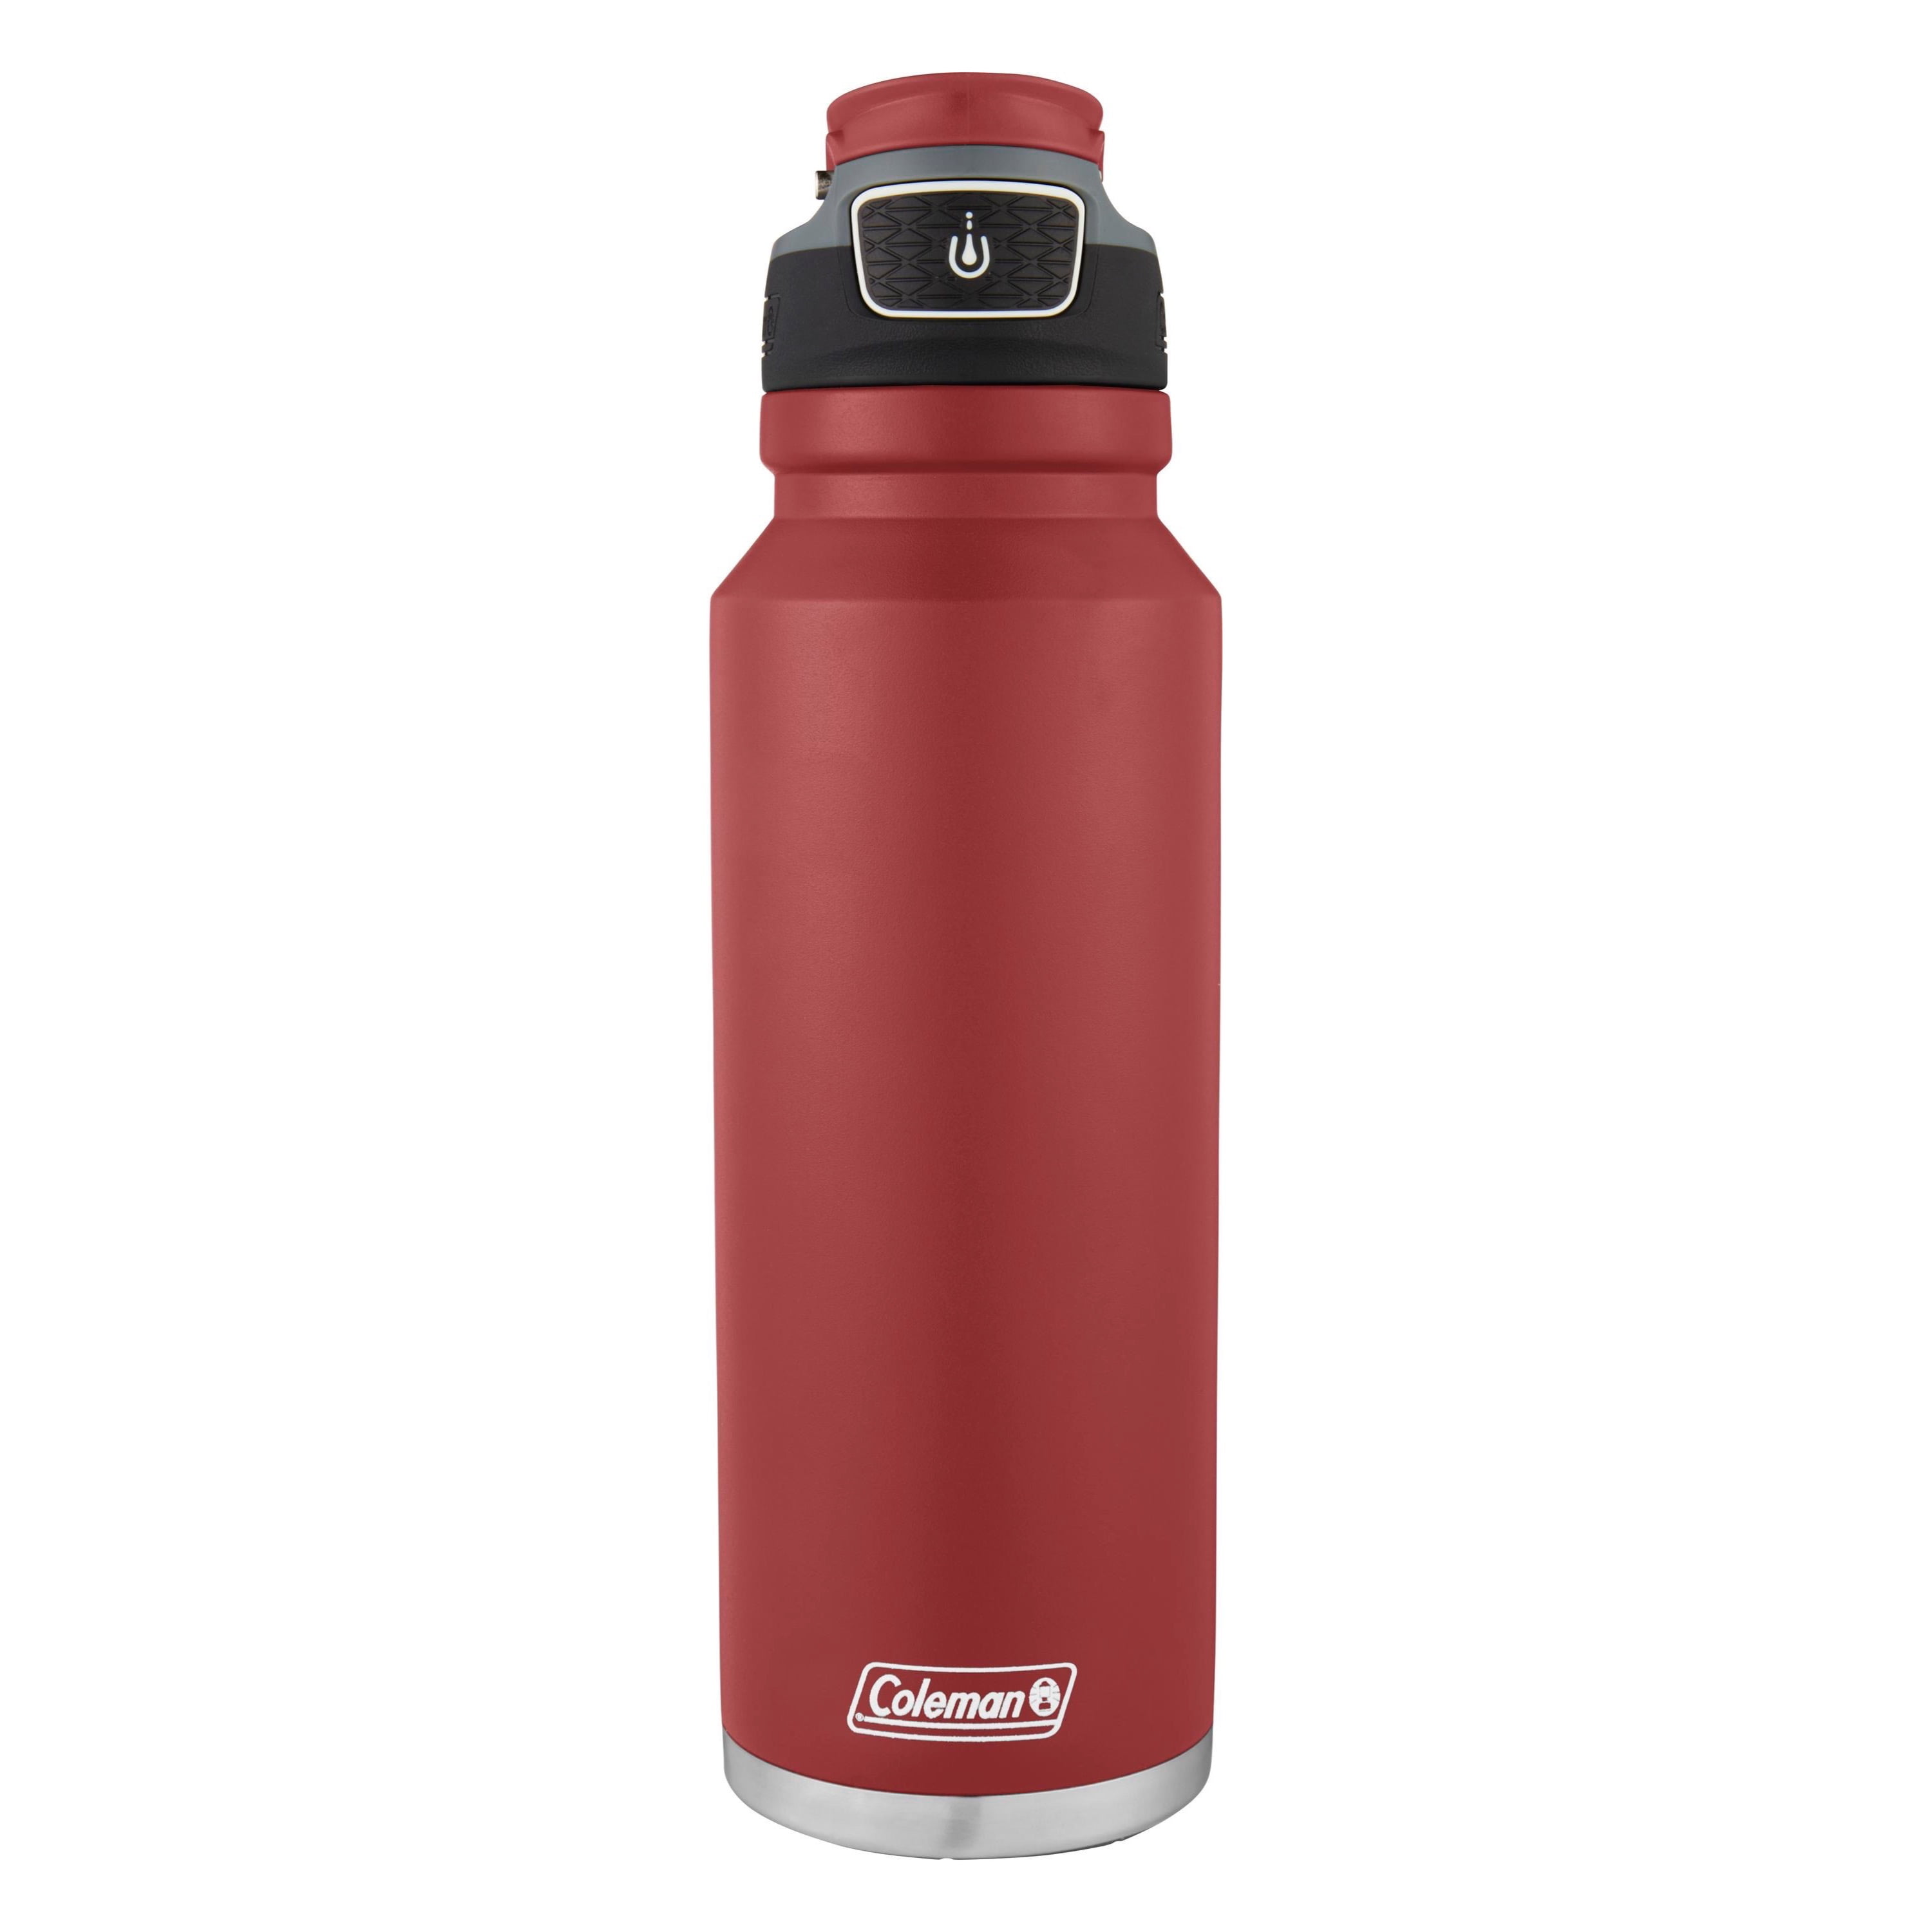 MOTHER - 'Captain Planet' red penguin reusable stainless steel bottle – The  Halfway Store